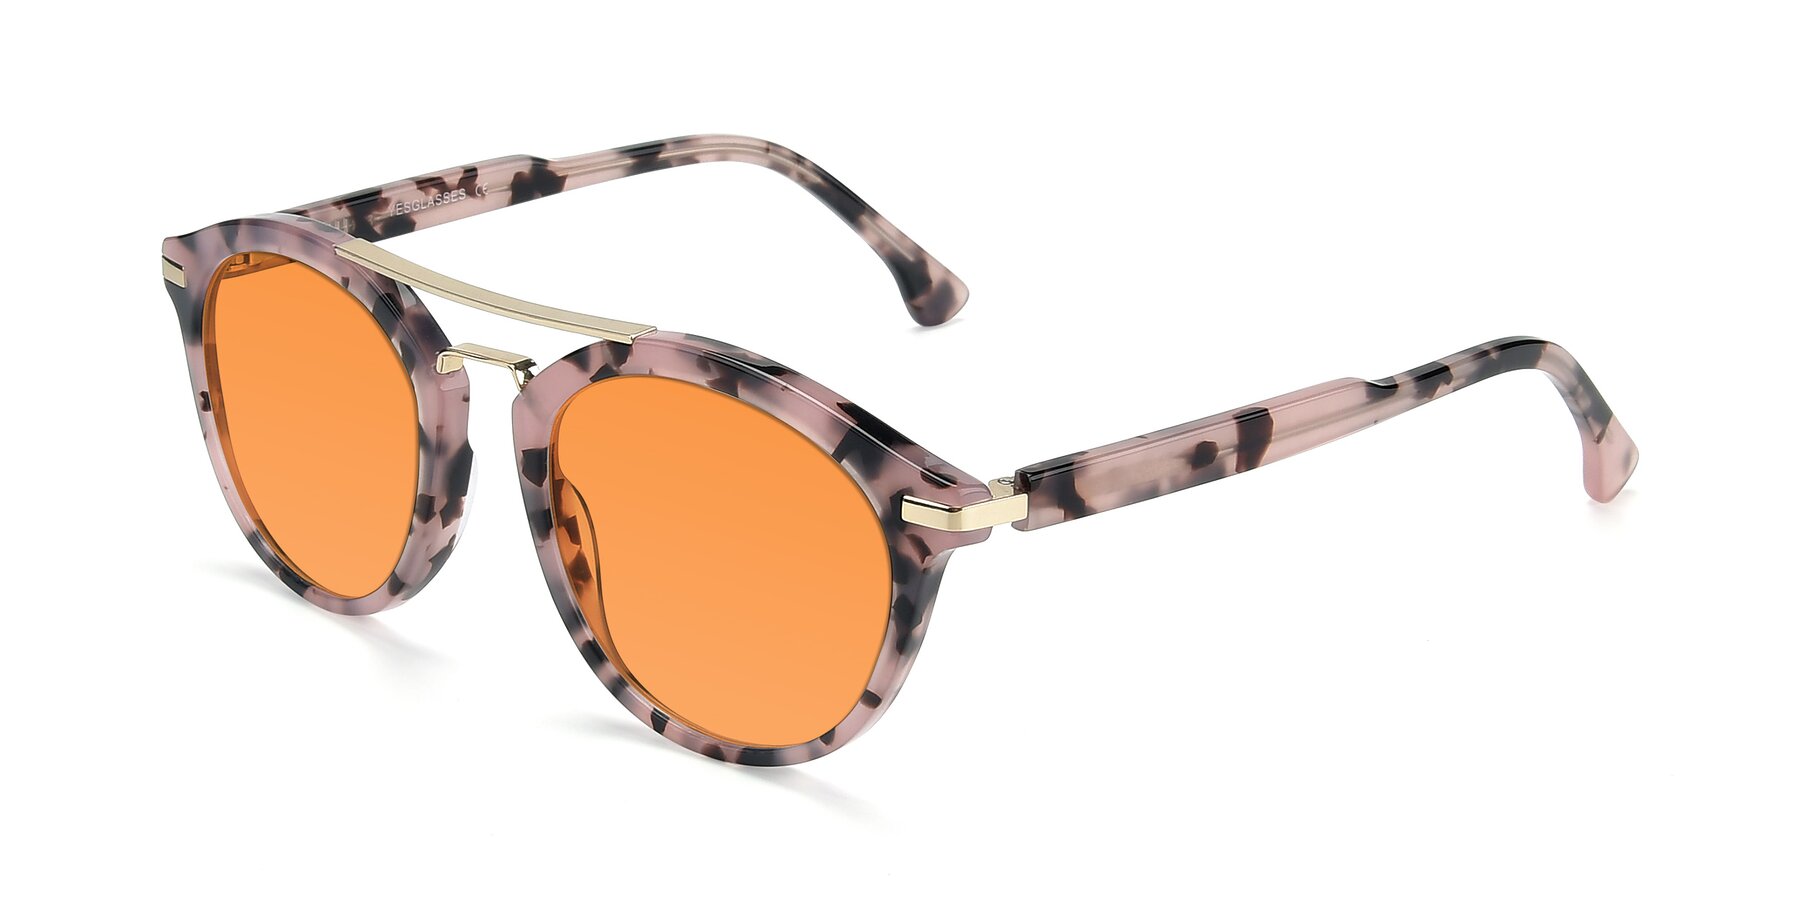 Angle of 17236 in Havana Floral-Gold with Orange Tinted Lenses